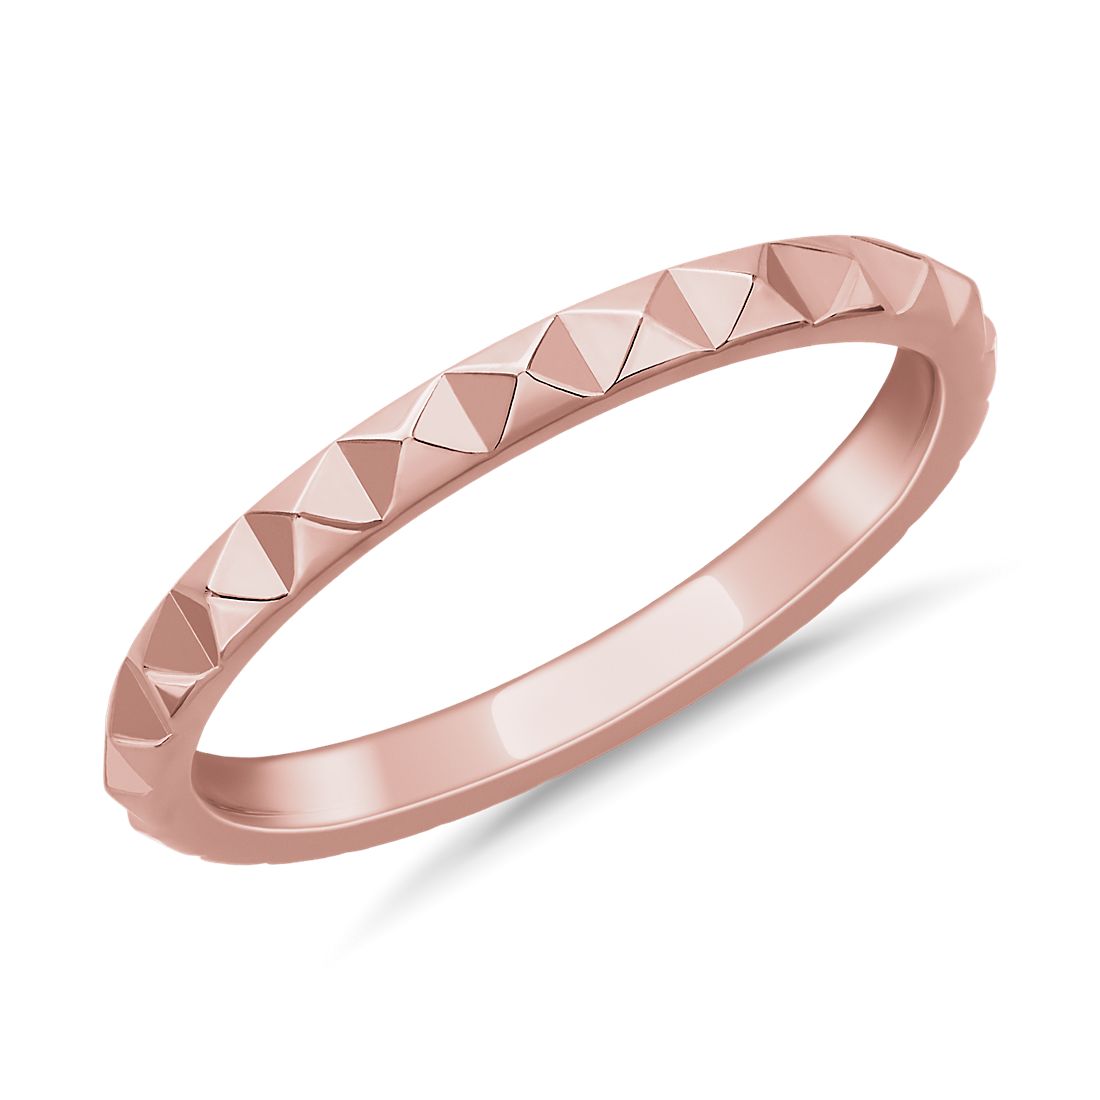 Stackable Pyramid High Polish Ring in 14k Rose Gold (2 mm)